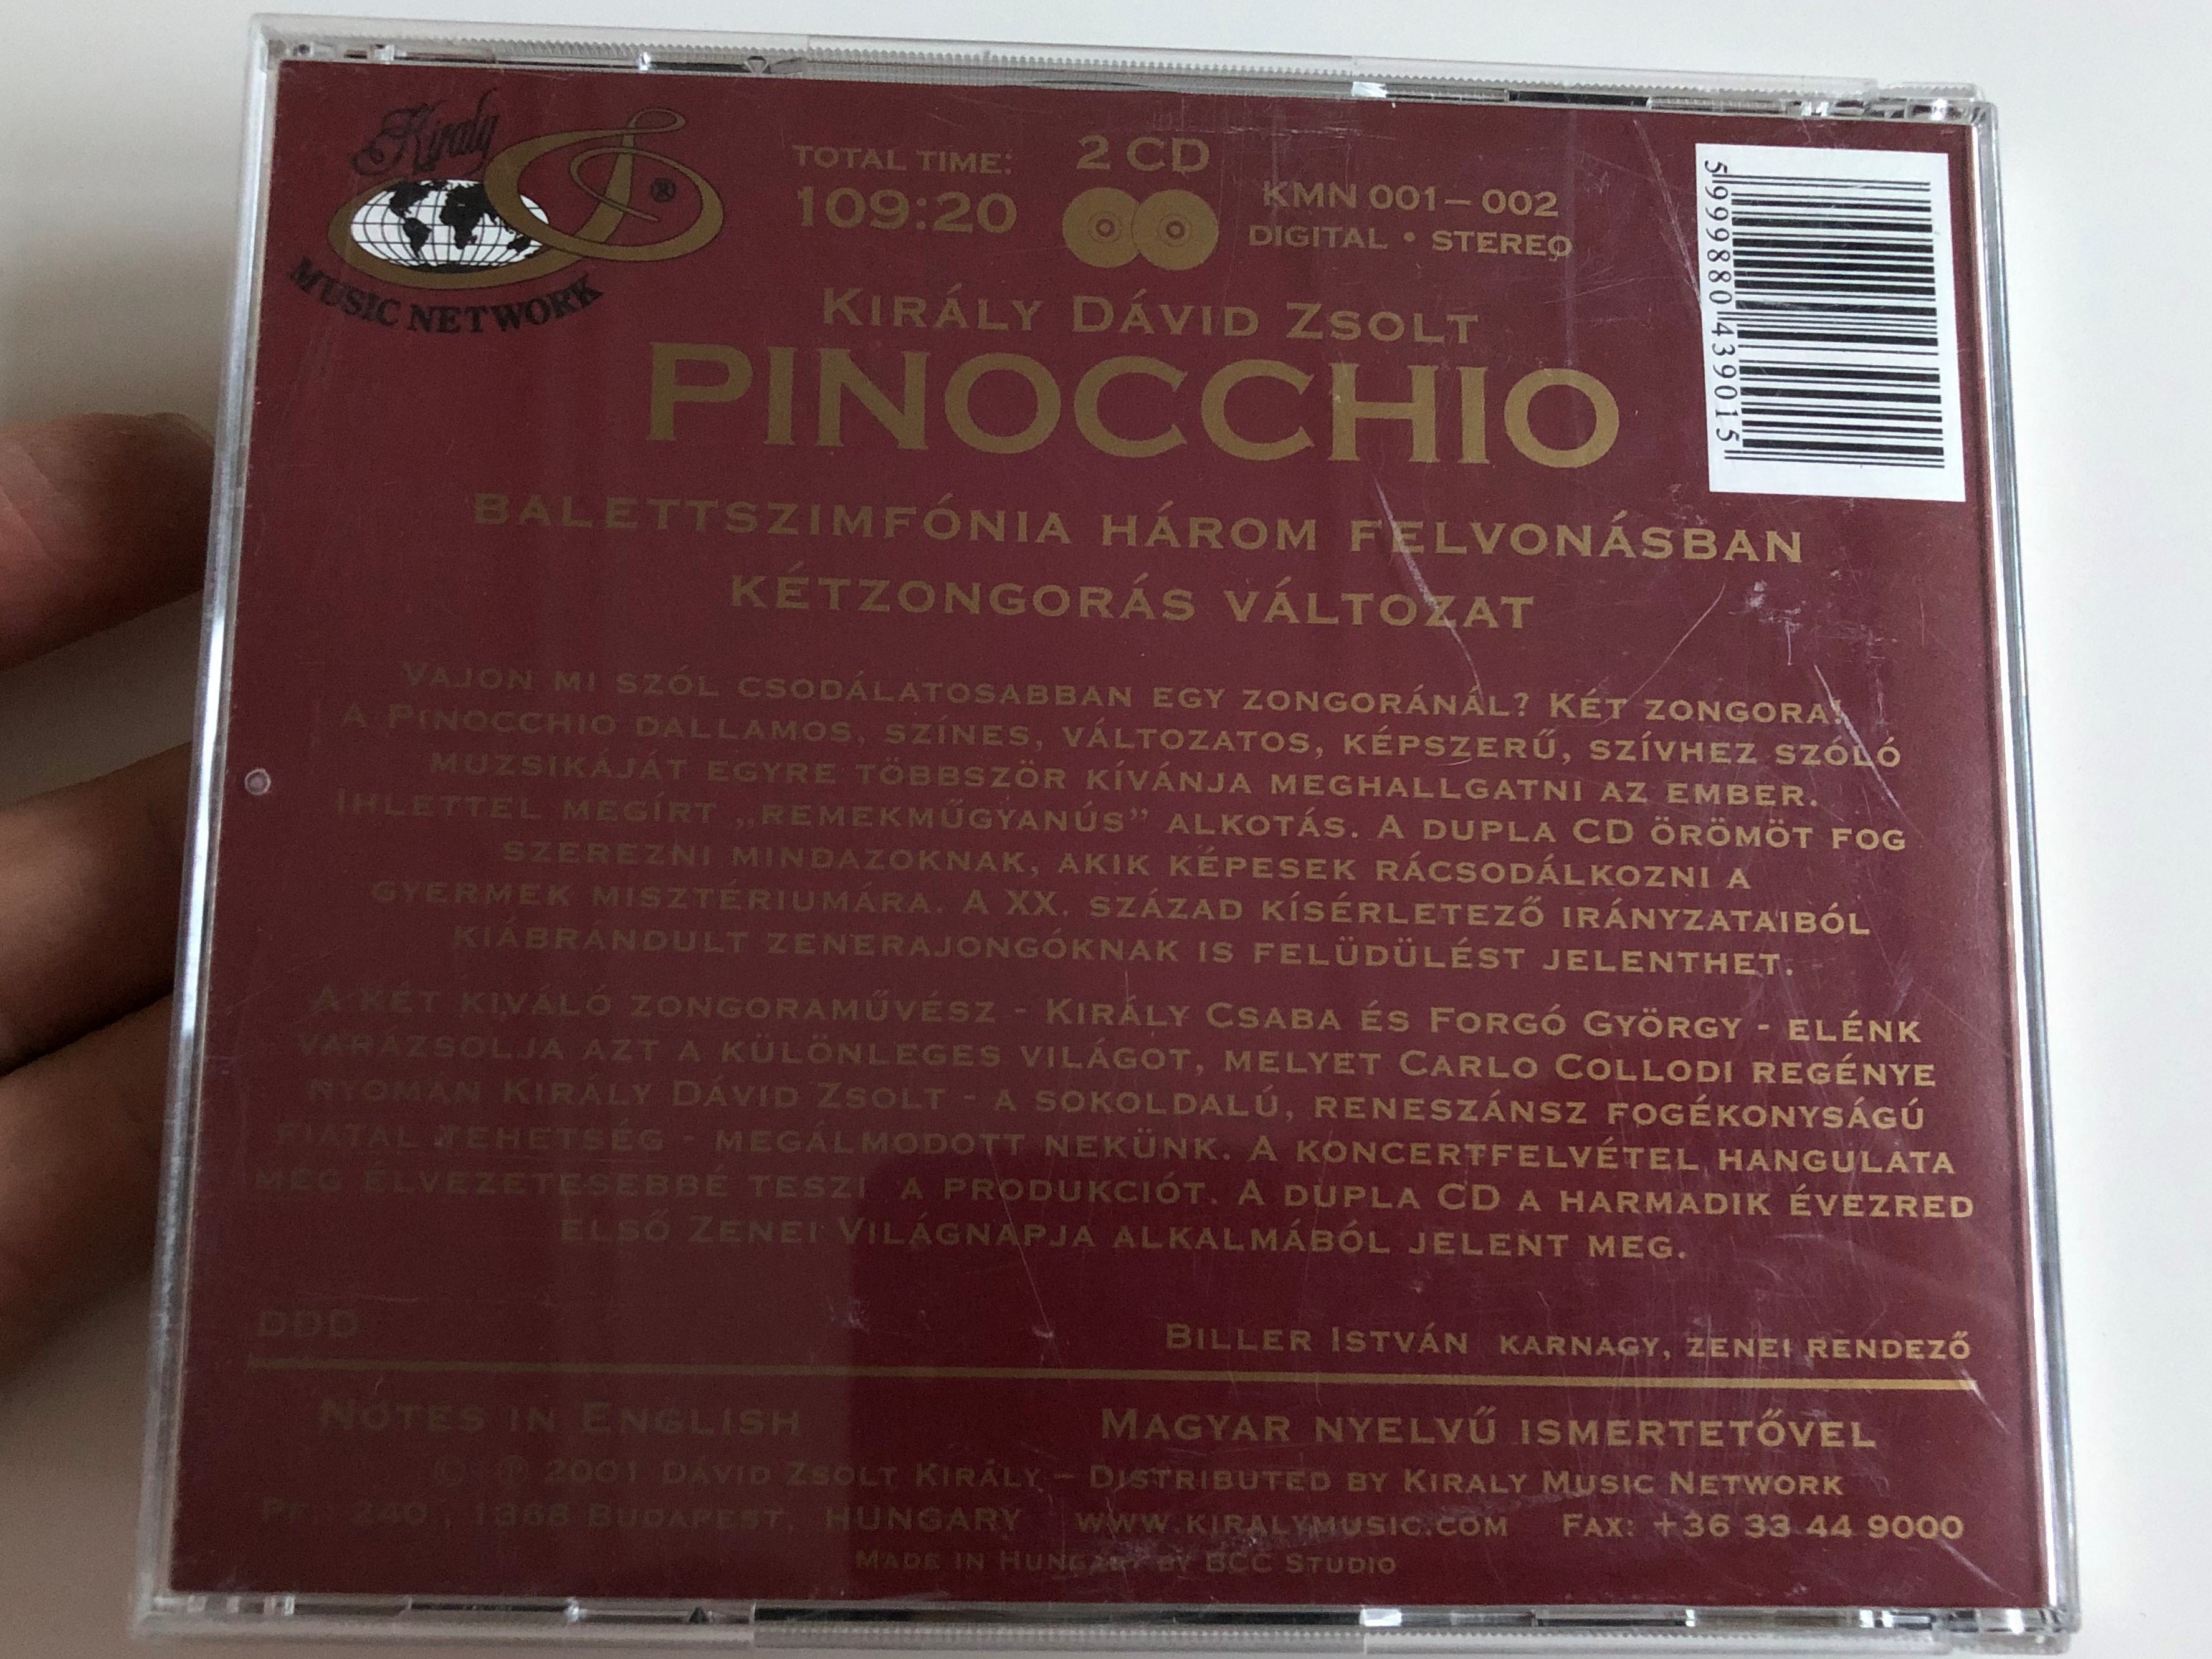 david-zsolt-kiraly-pinocchio-ballet-symphony-in-3-acts-csaba-kiraly-gyorgy-forgo-pianists-live-recording-of-the-world-premiere-kiraly-music-network-2x-audio-cd-2001-kmn-001-002-17-.jpg